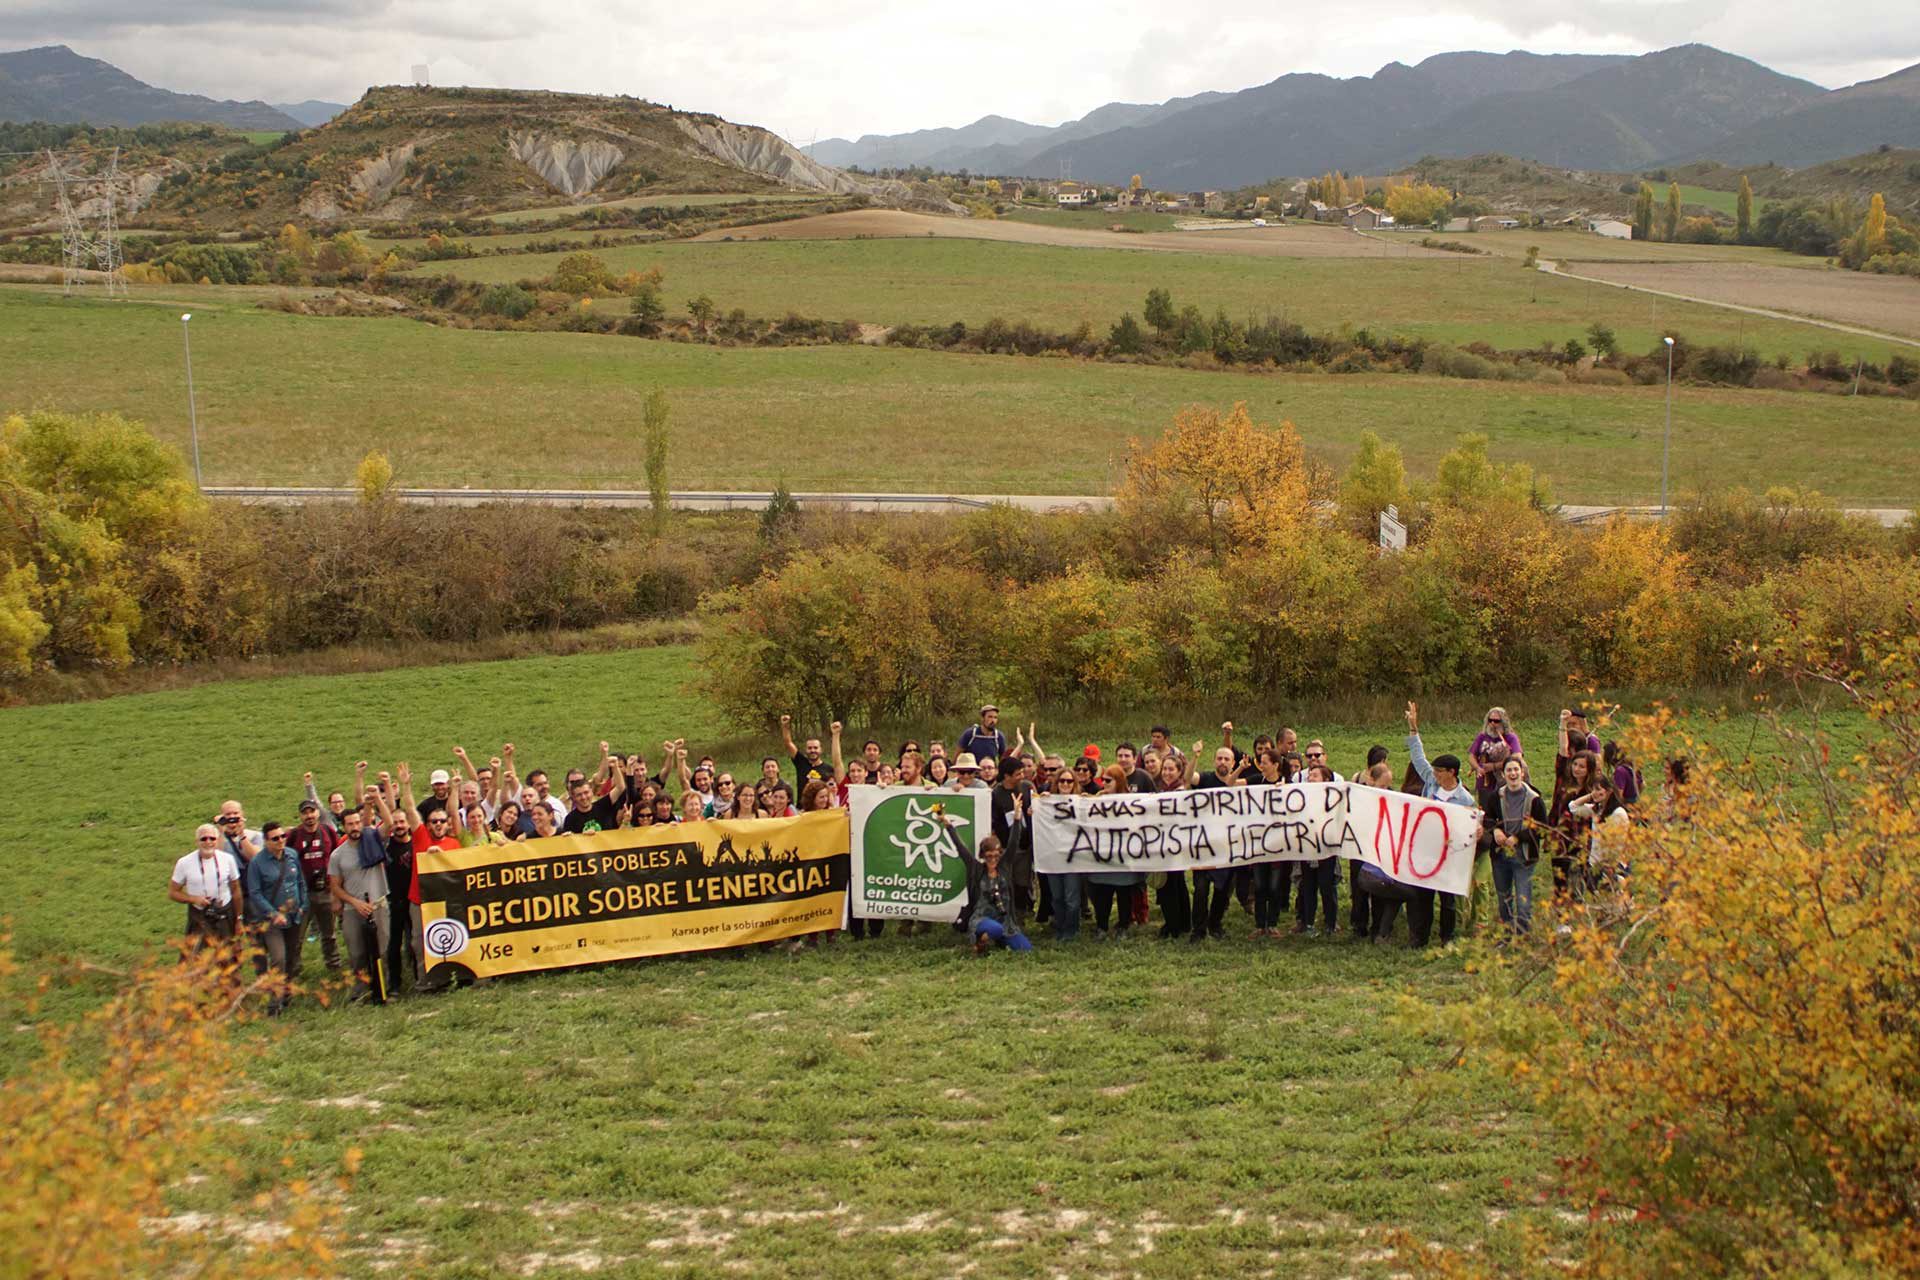 Catalonia, Spain: Building a powerful regional network for energy sovereignty